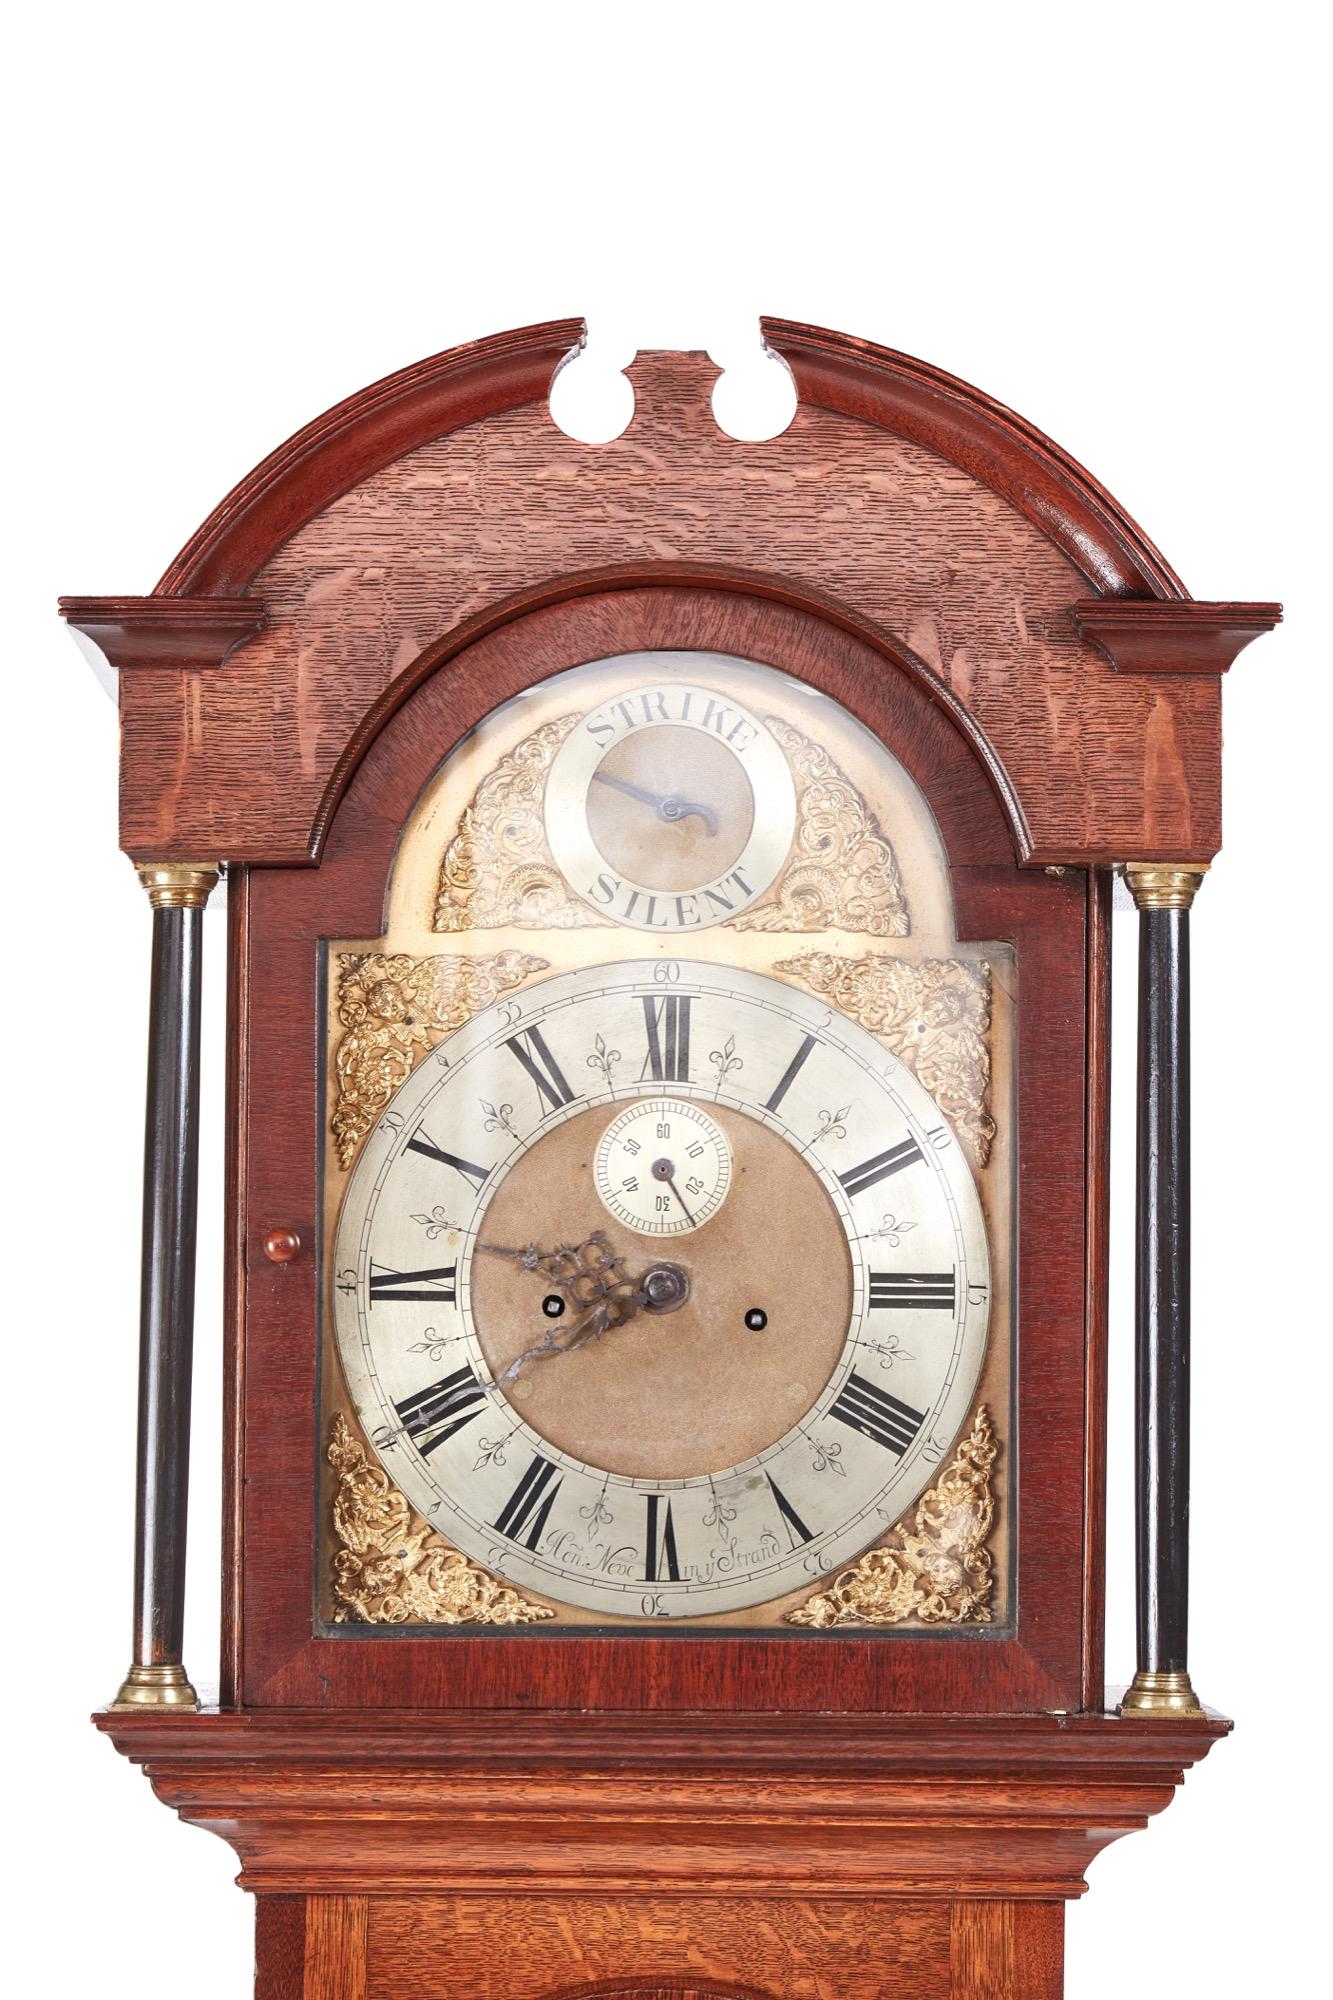 Early 19th century antique George III oak brass face 8 day grandfather clock with a swan-neck pediment and a very attractive brass face with seconds dial, strike and silent dial, 8 day duration mechanism striking the hour on a bell and a stunning